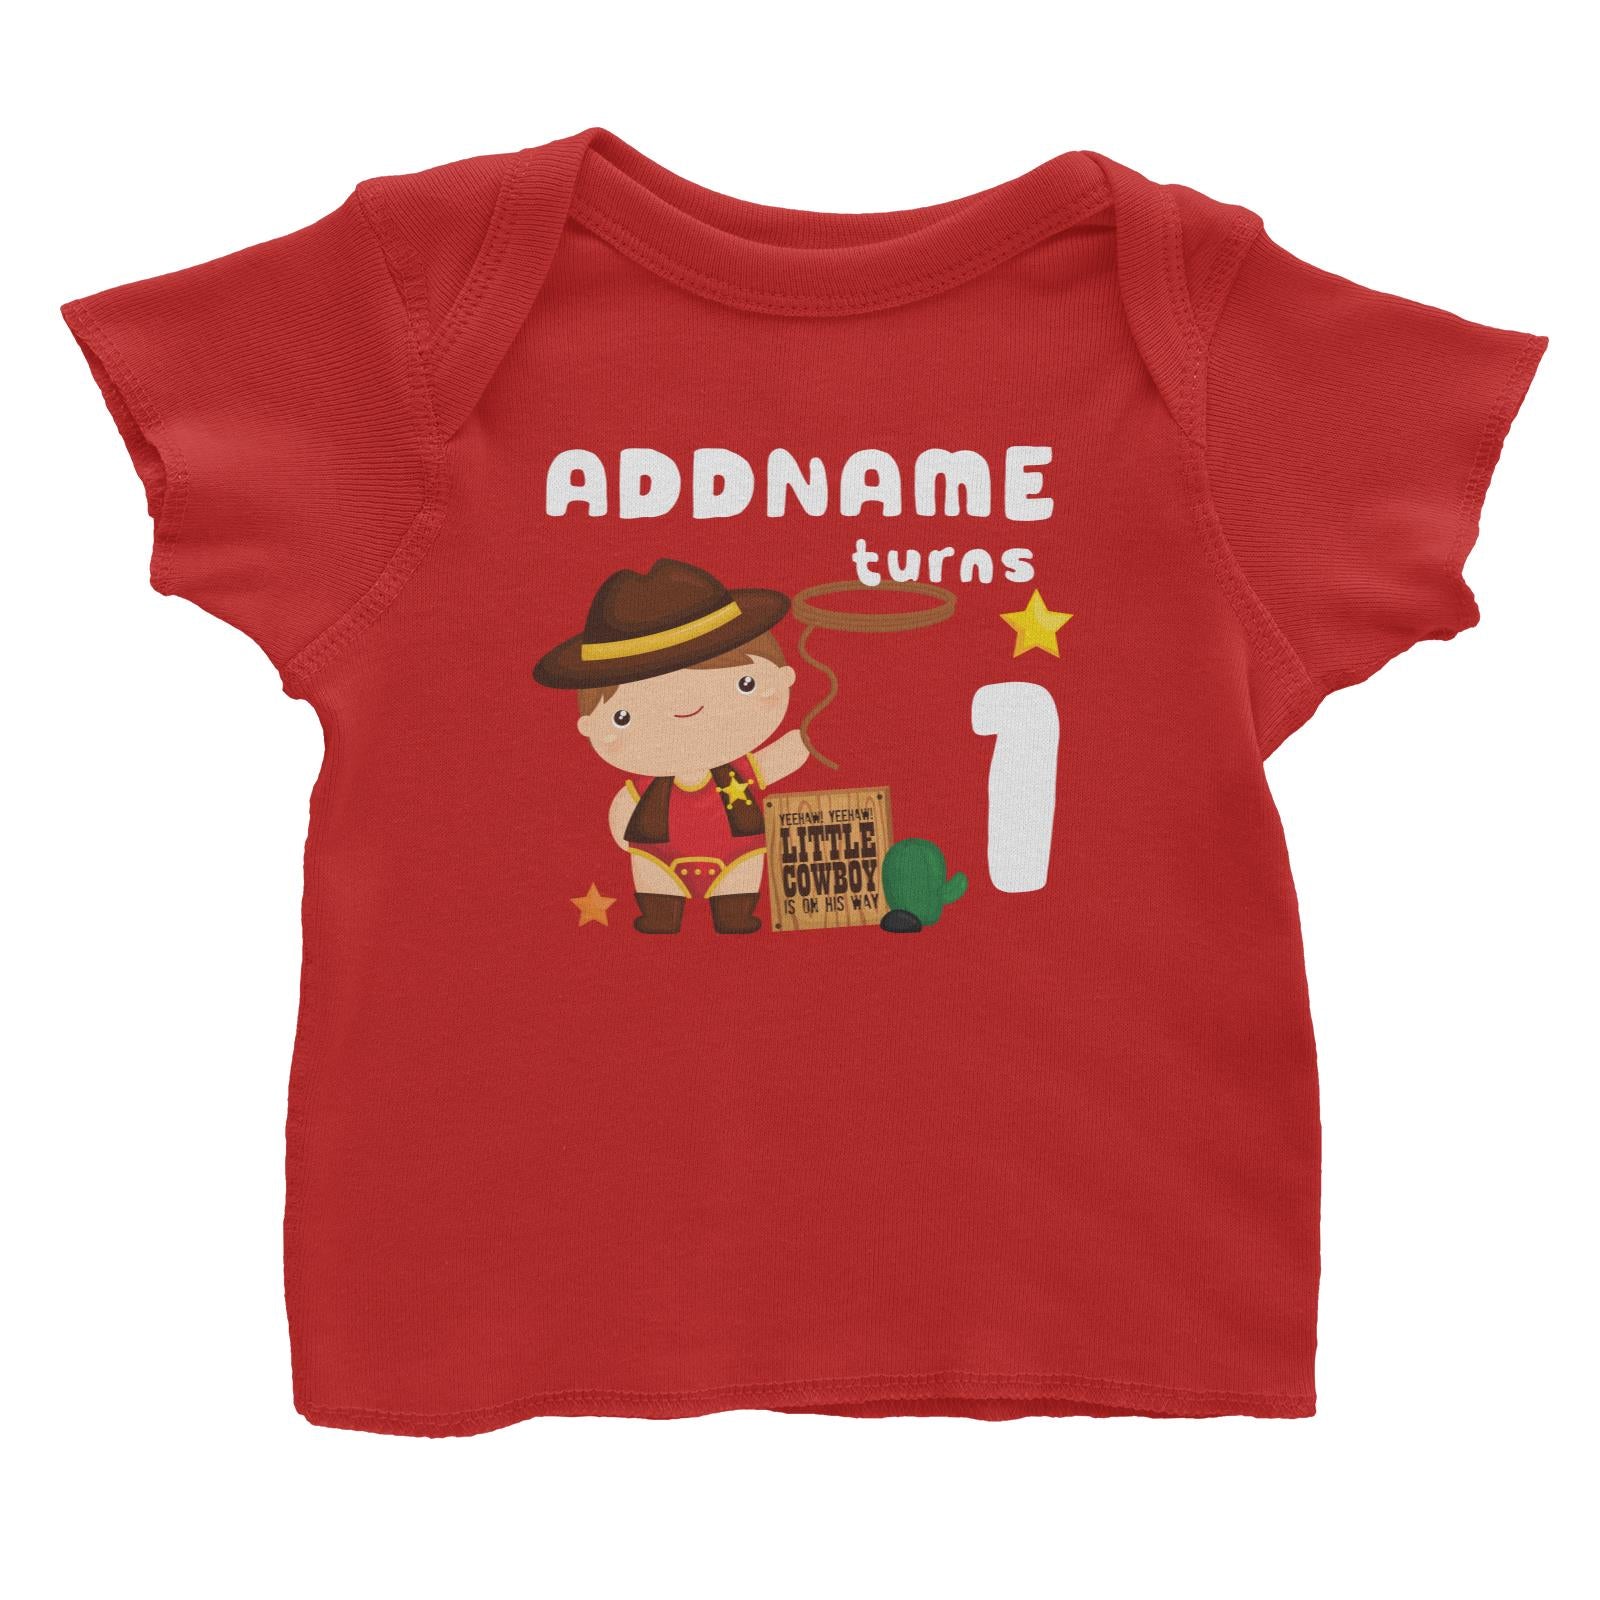 Birthday Cowboy Style Yeehaw Little Cowboy Is On His Way Addname Turns 1 Baby T-Shirt